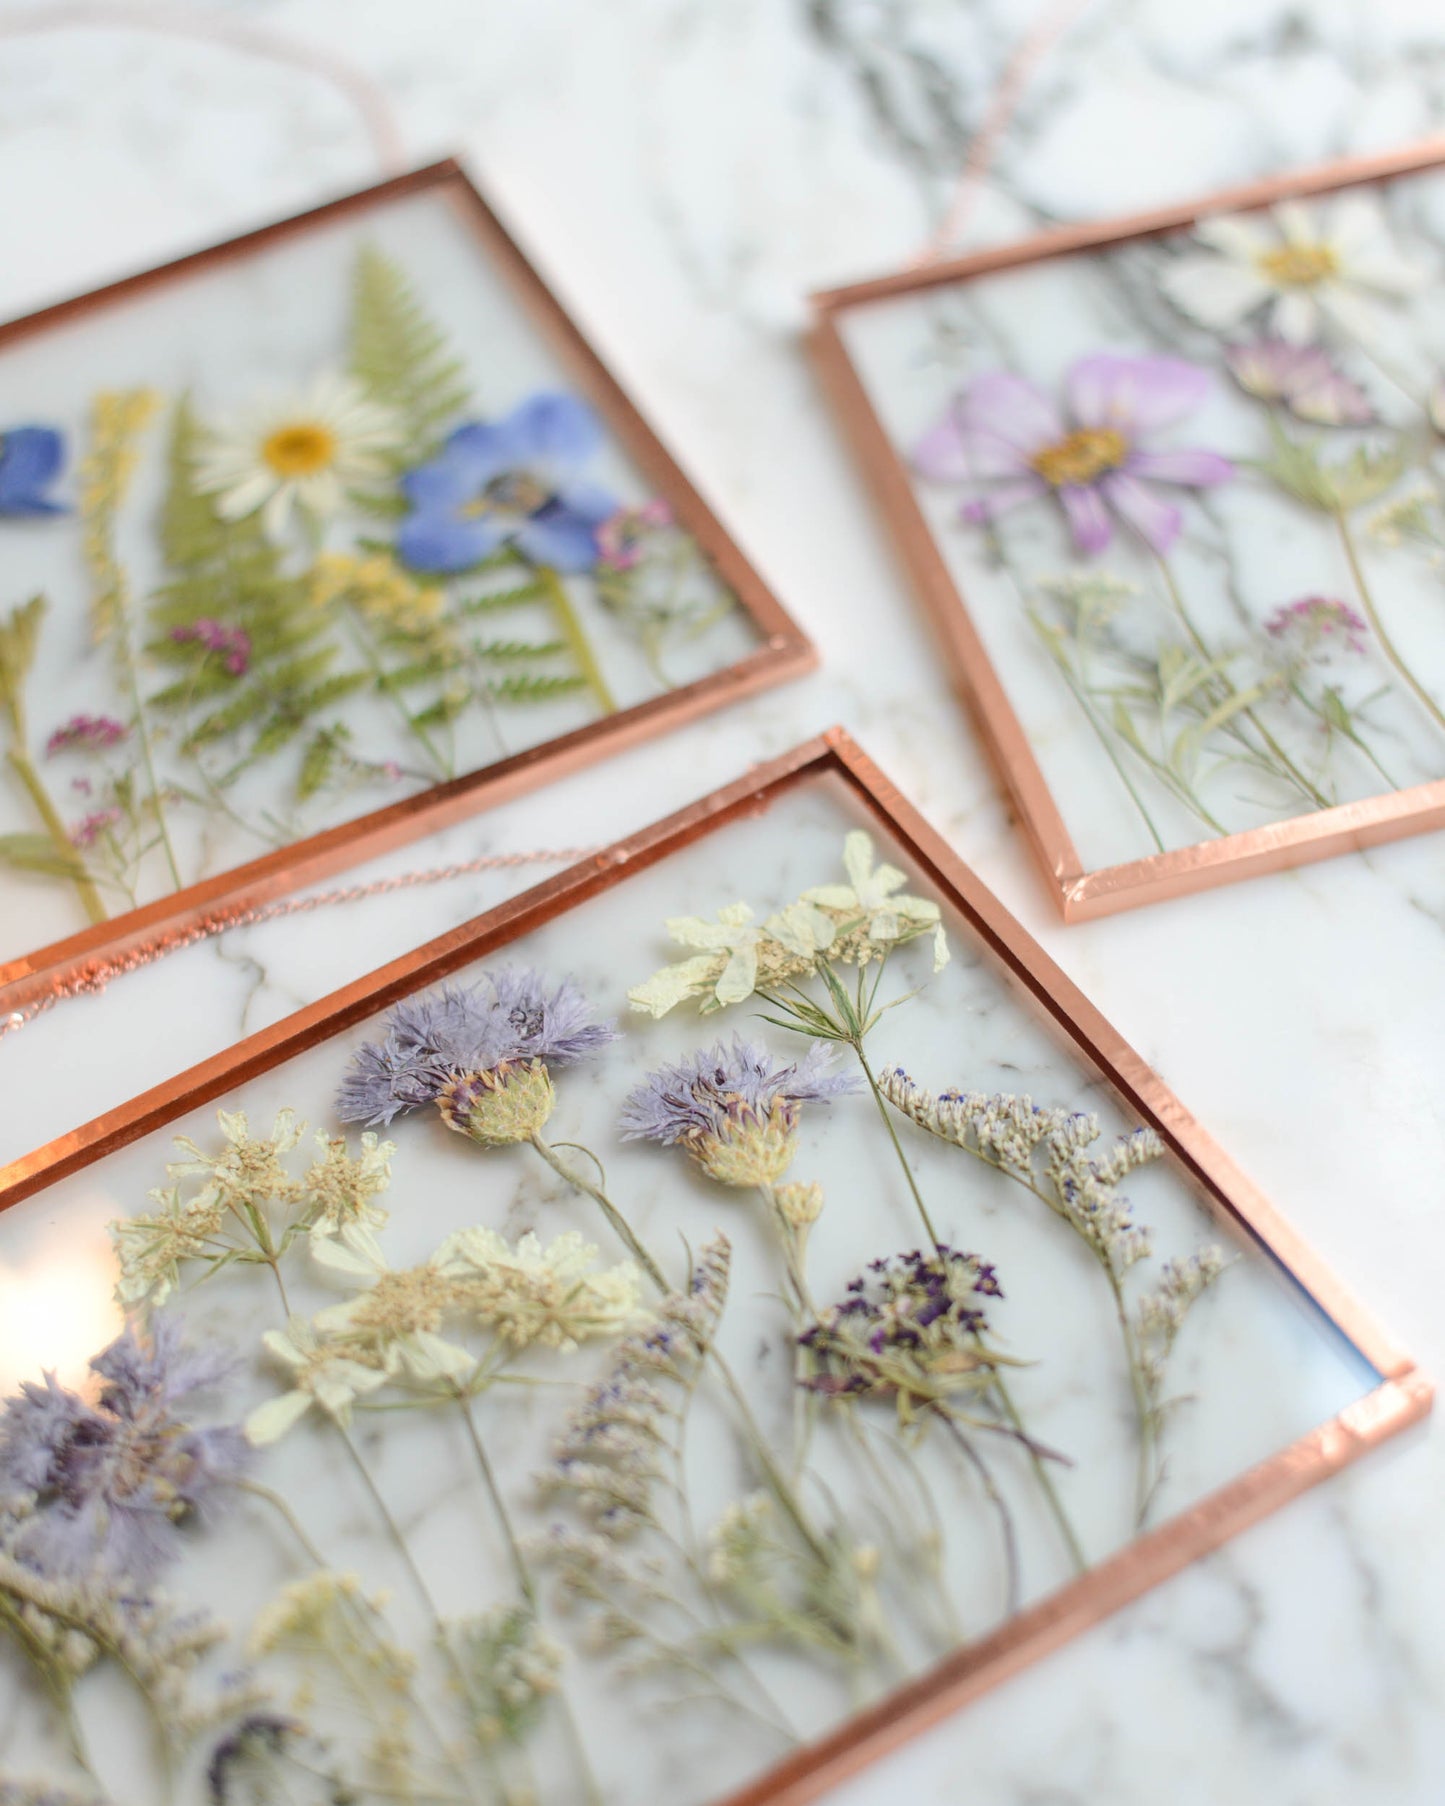 In the Meadow - Real Pressed Flowers in Medium Glass and Copper Wall Hanging